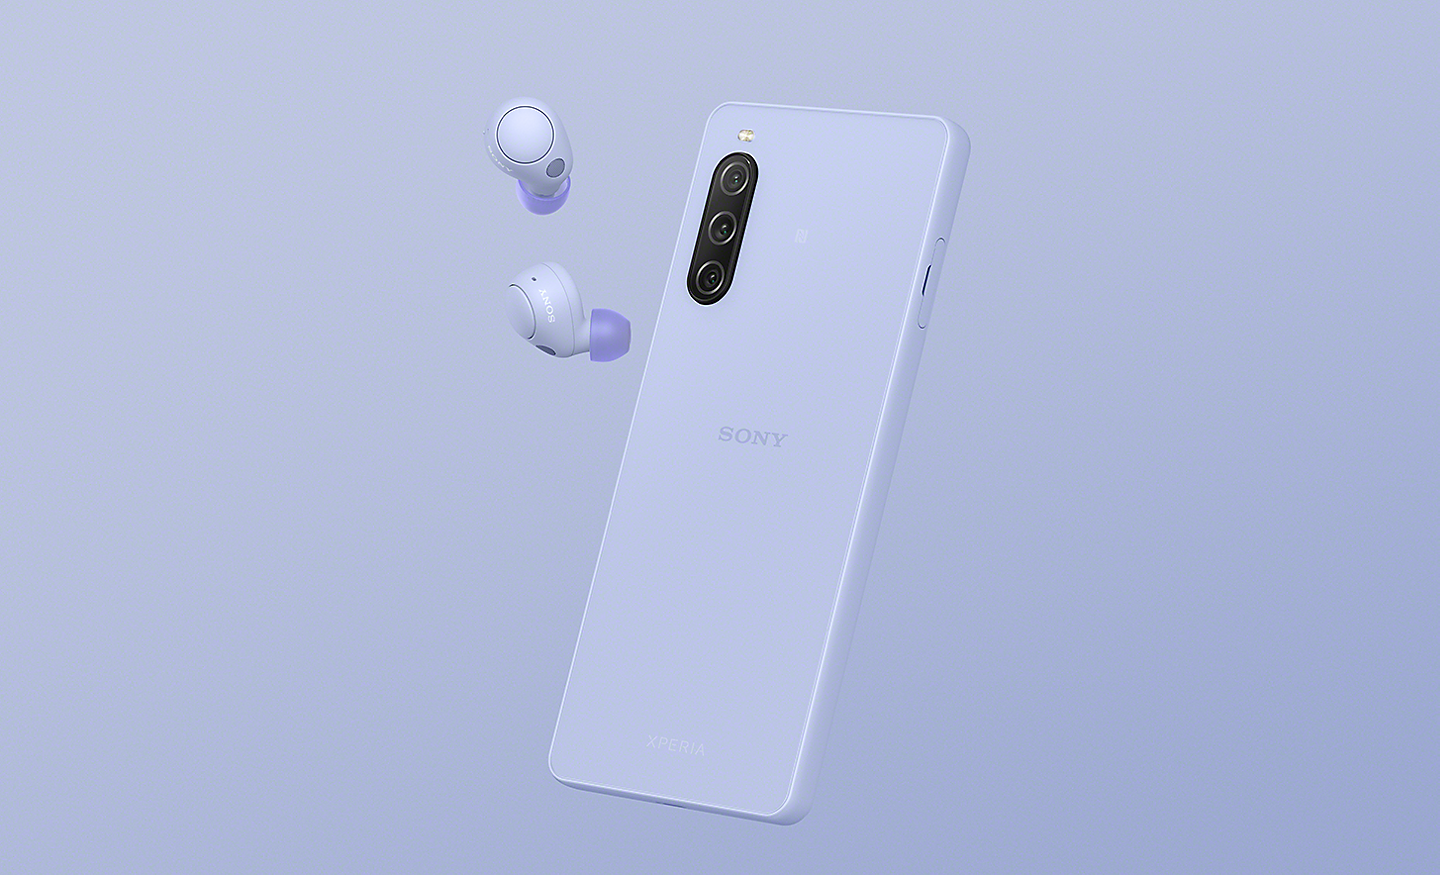 Xperia 10 V and matching WF-C700N noise cancelling headphones in Lavender